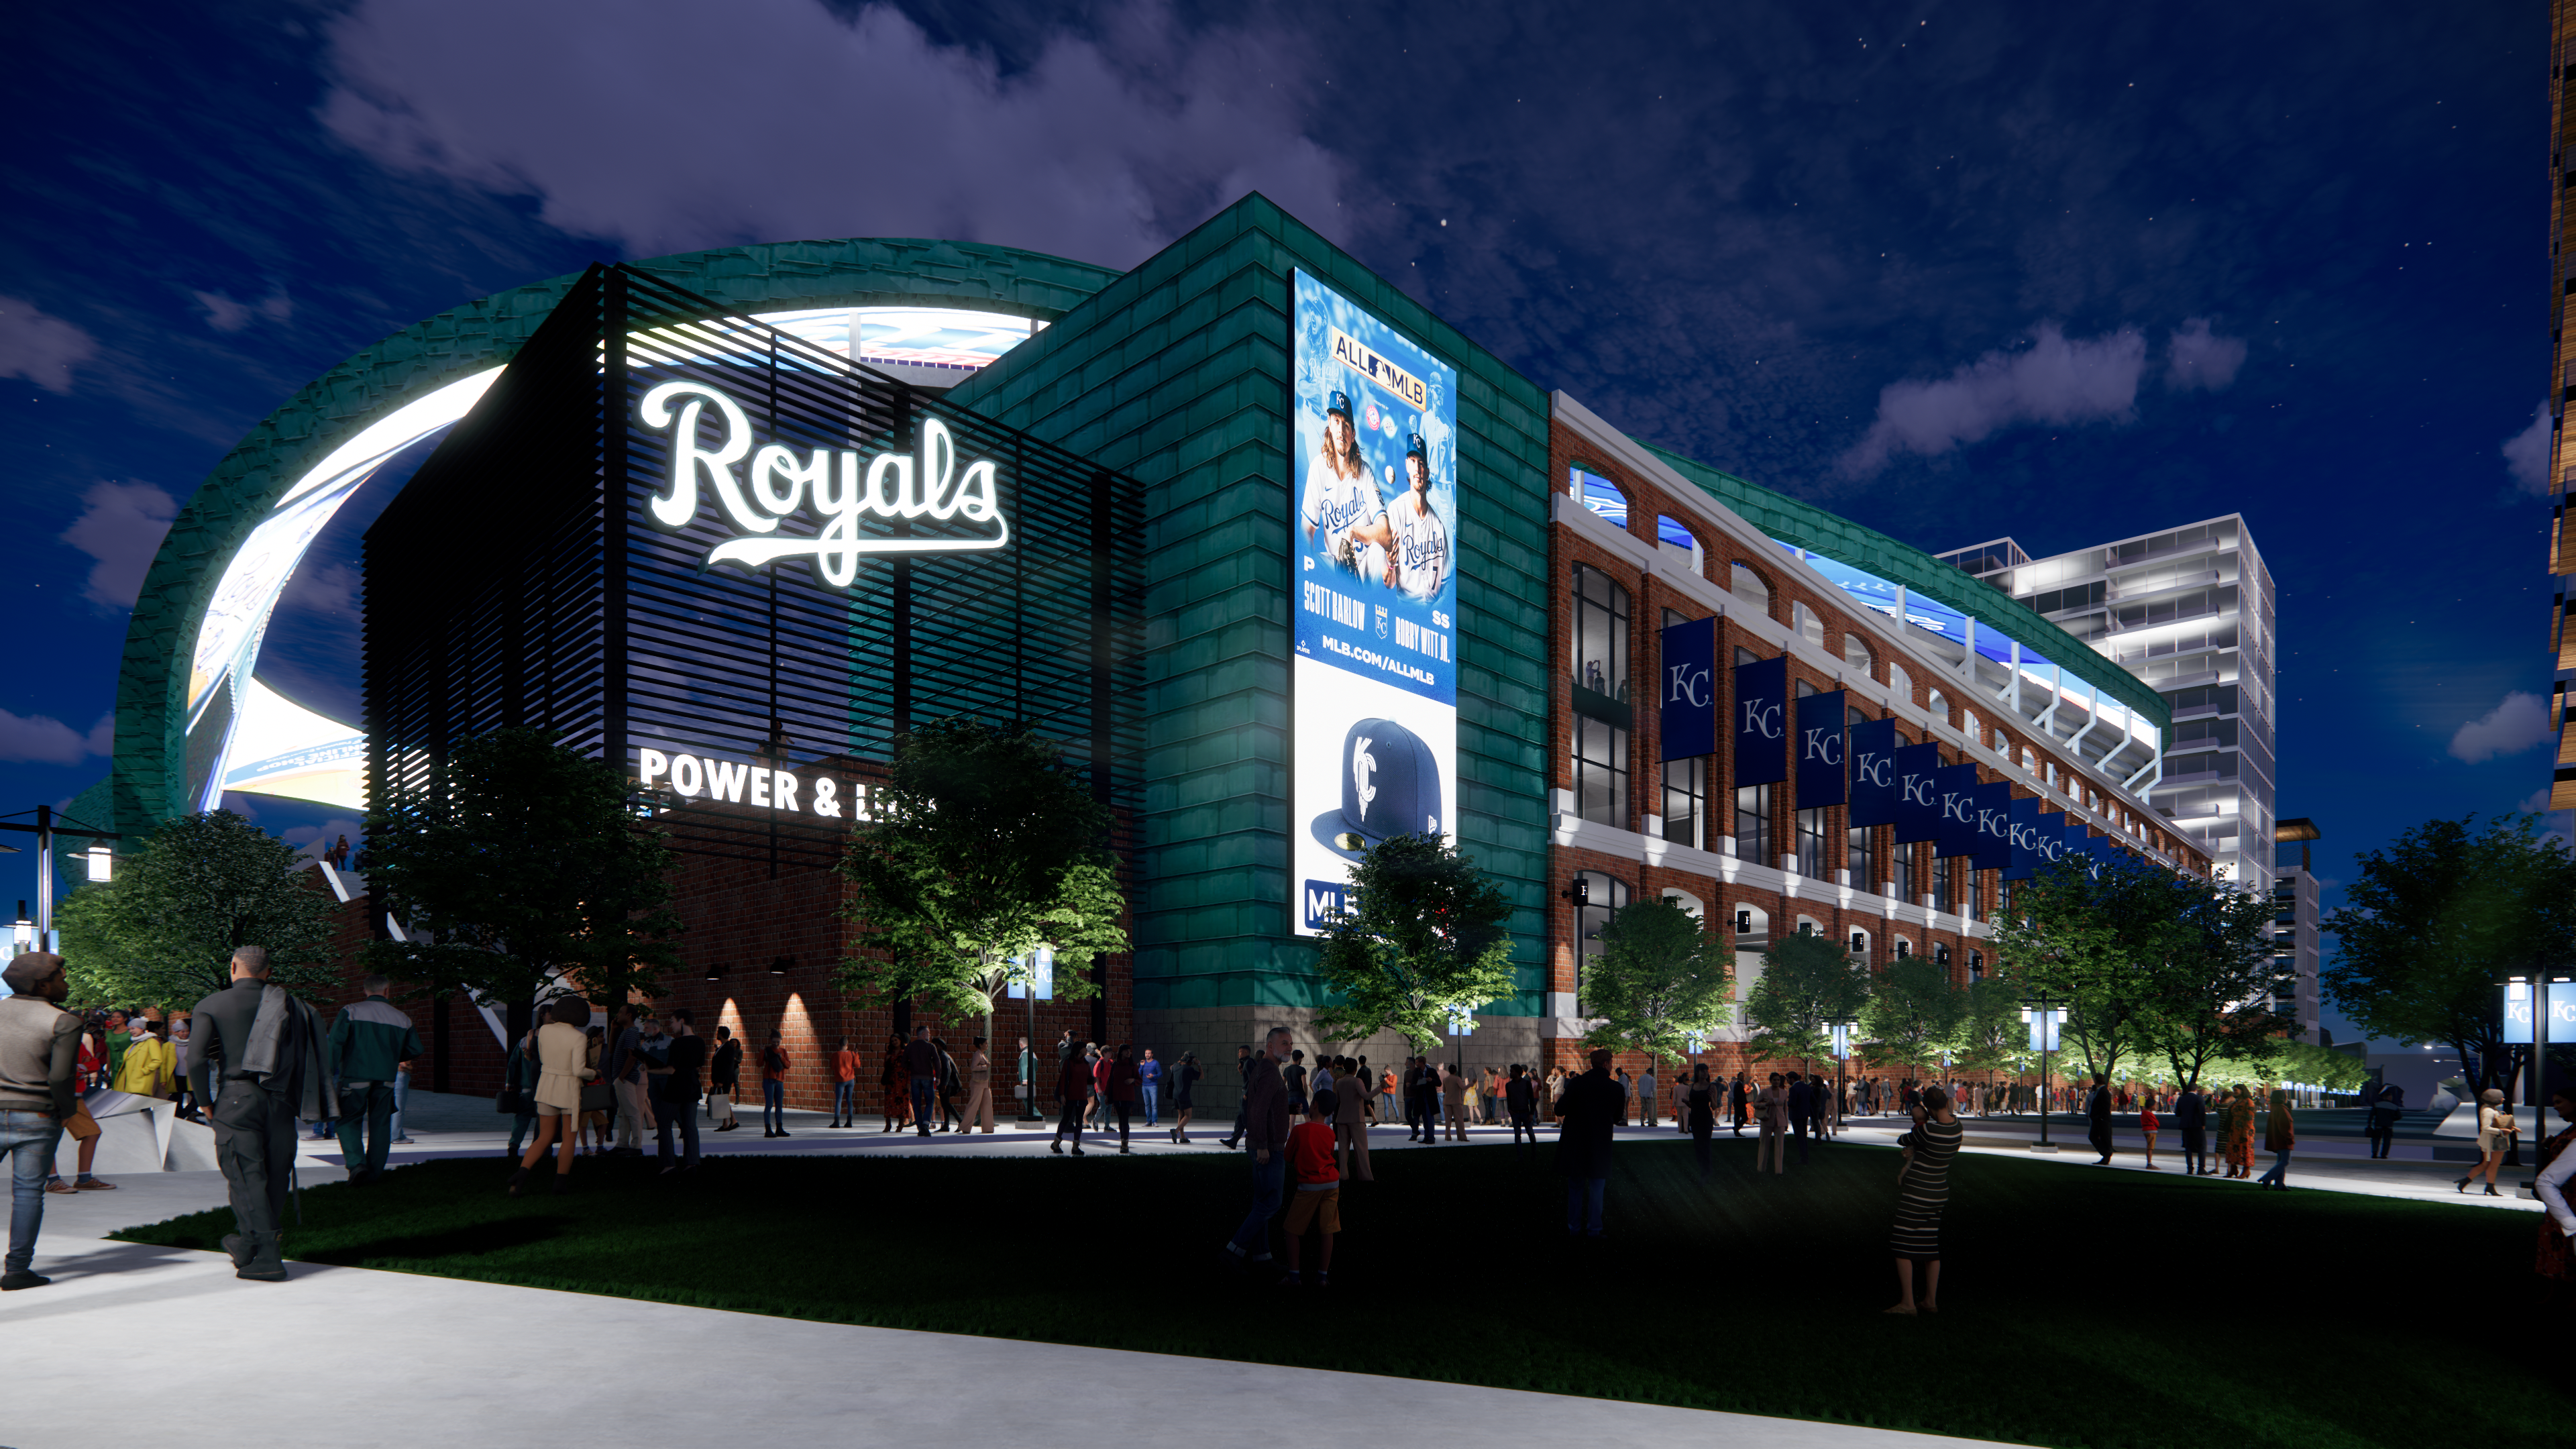 KC Royals: The Dream dimensions of a new ballpark